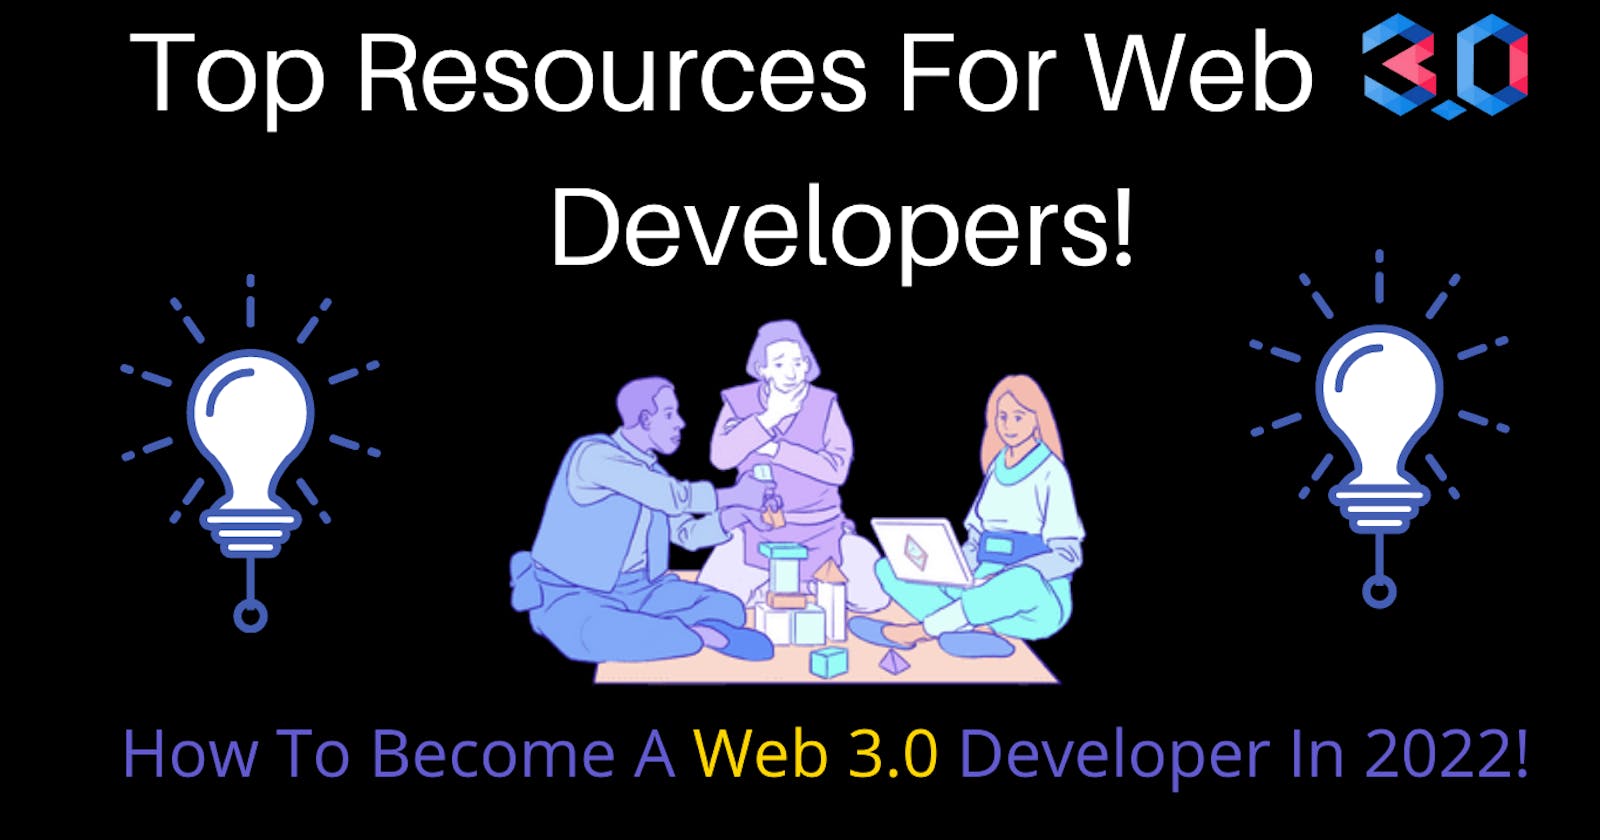 Top Learning Resources For Web 3.0 Developers!